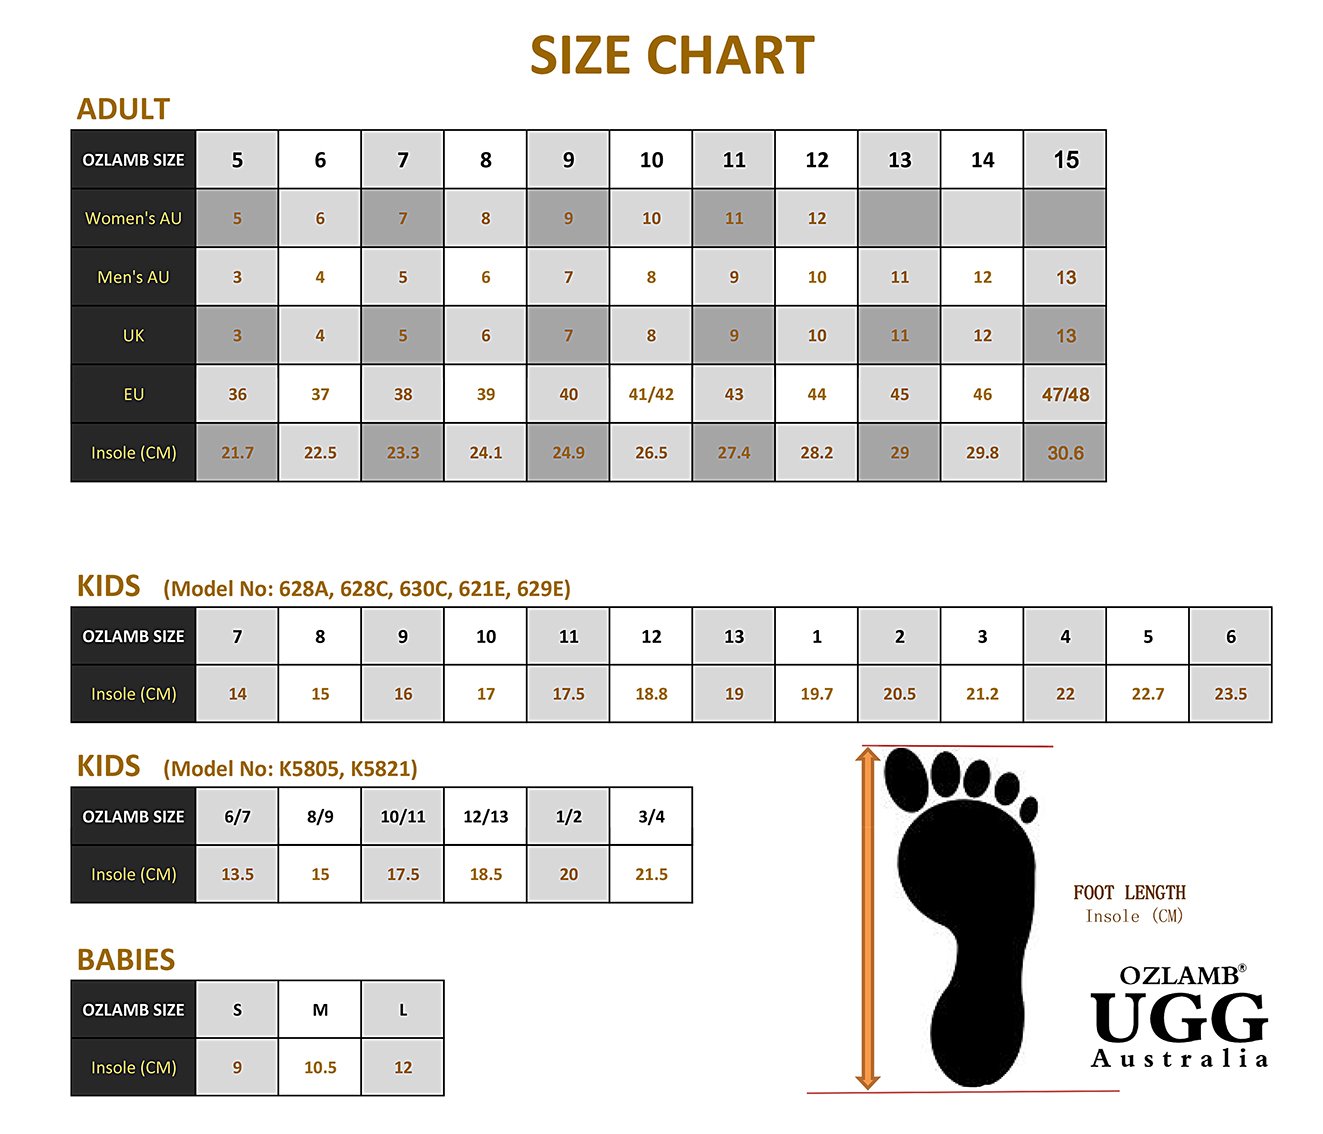 ugg sizes kid compared women's